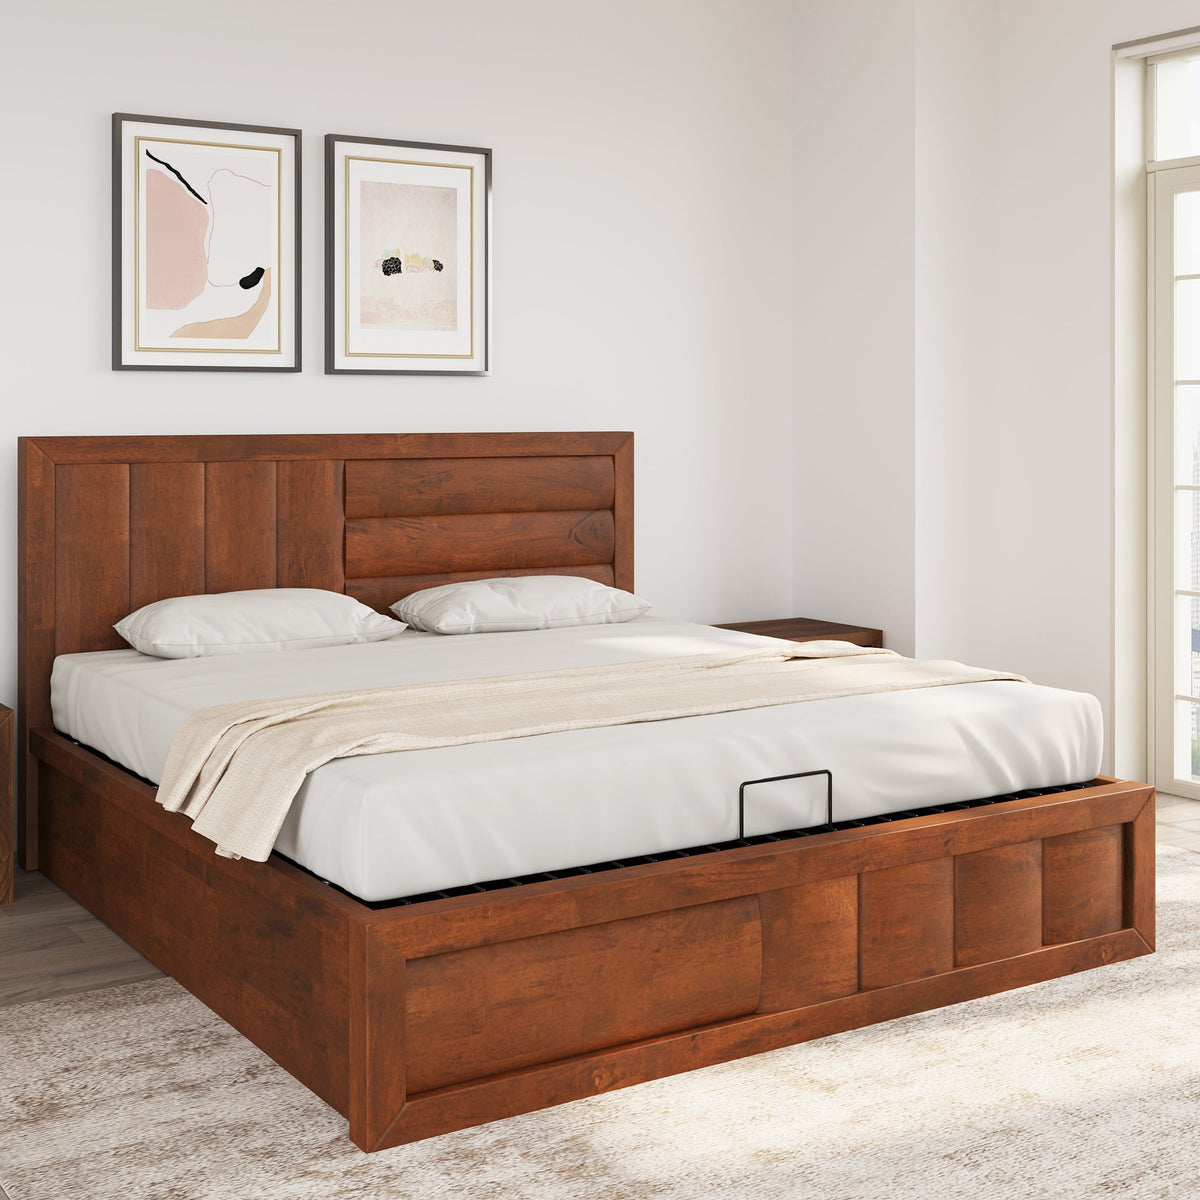 Buy Gladiator Queen Bed With Hydraulic Storage (Brown)Online- At Home ...